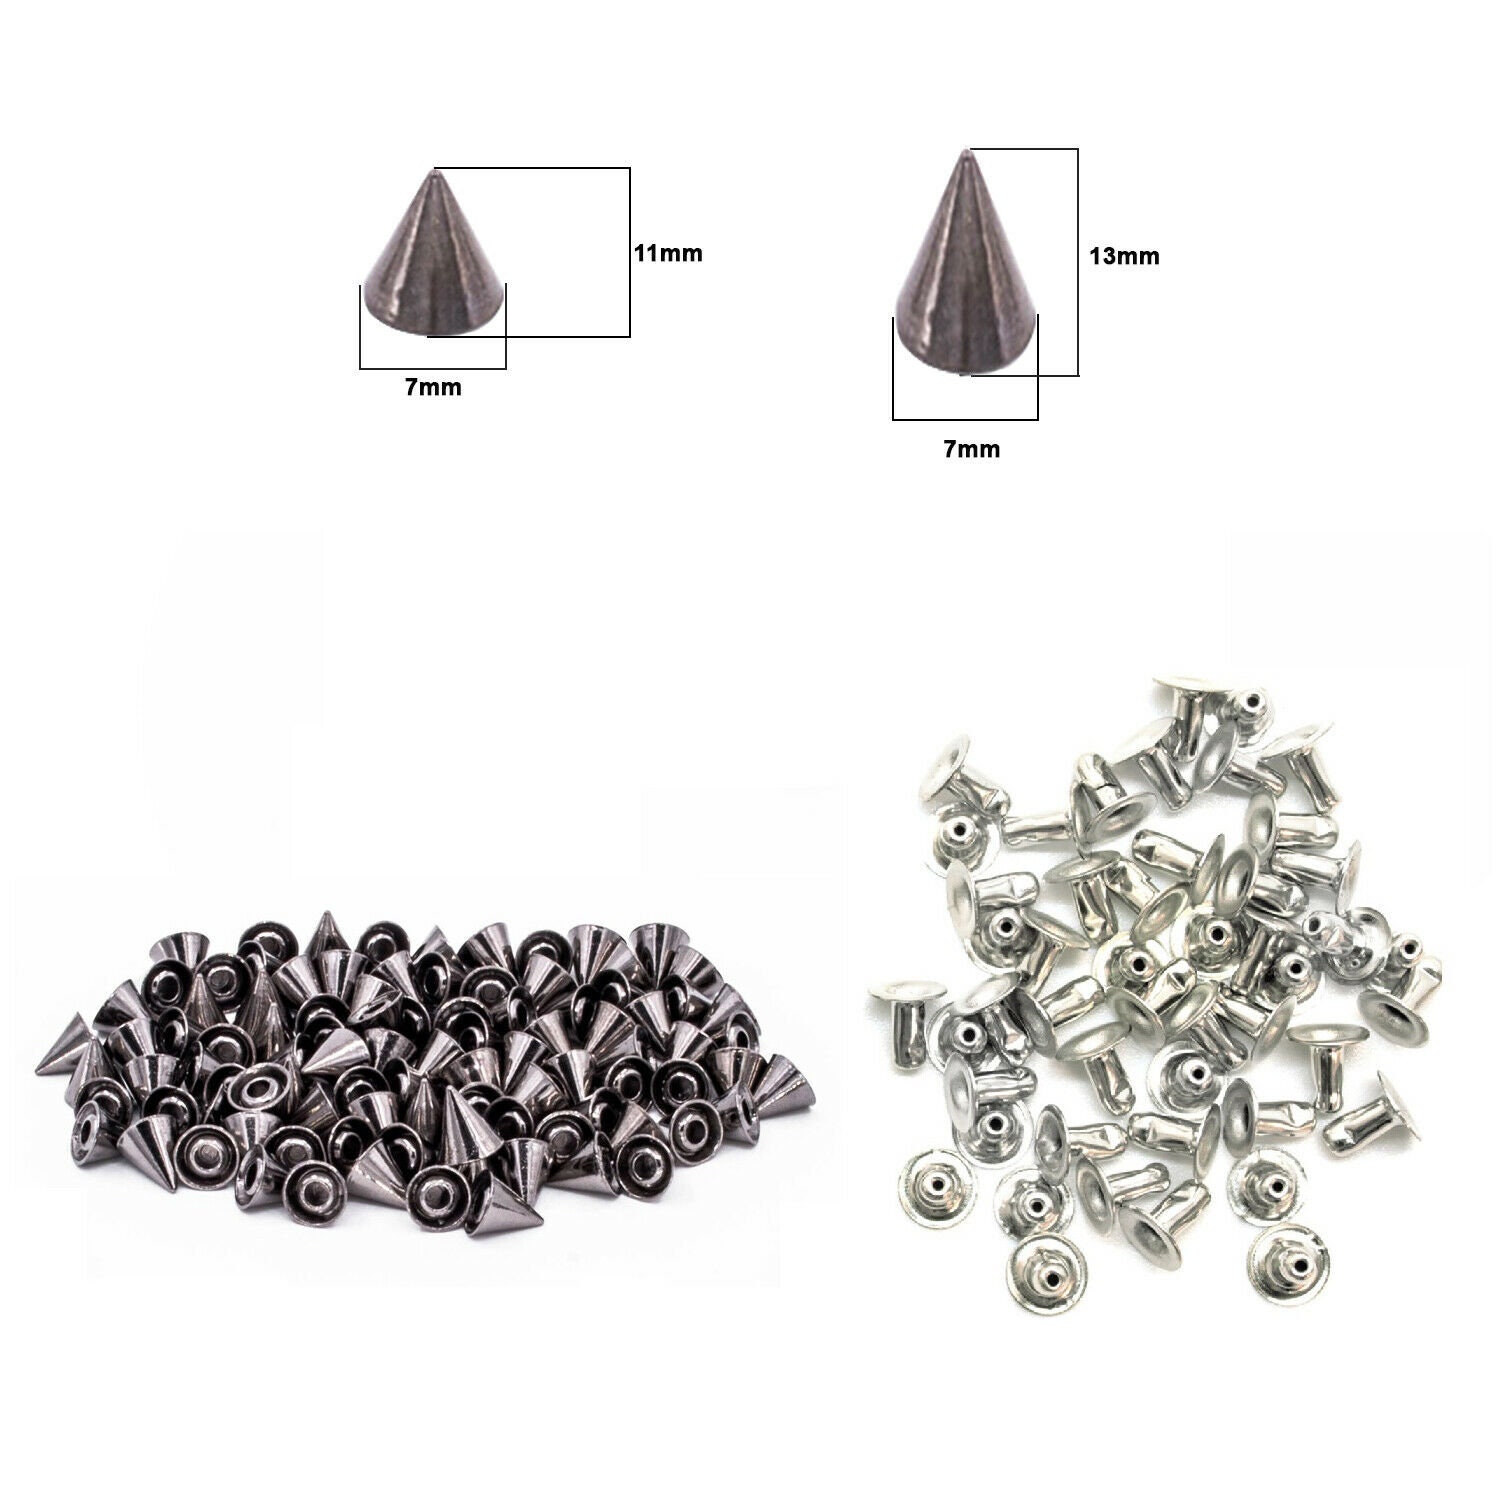 Renashed 150 Sets Punk Spikes and Studs, 13 Shape Cone Spikes Leather Rivets Gothic Screw Back Studs with Install Tools for DIY Necklace Jacket Vest Shoes